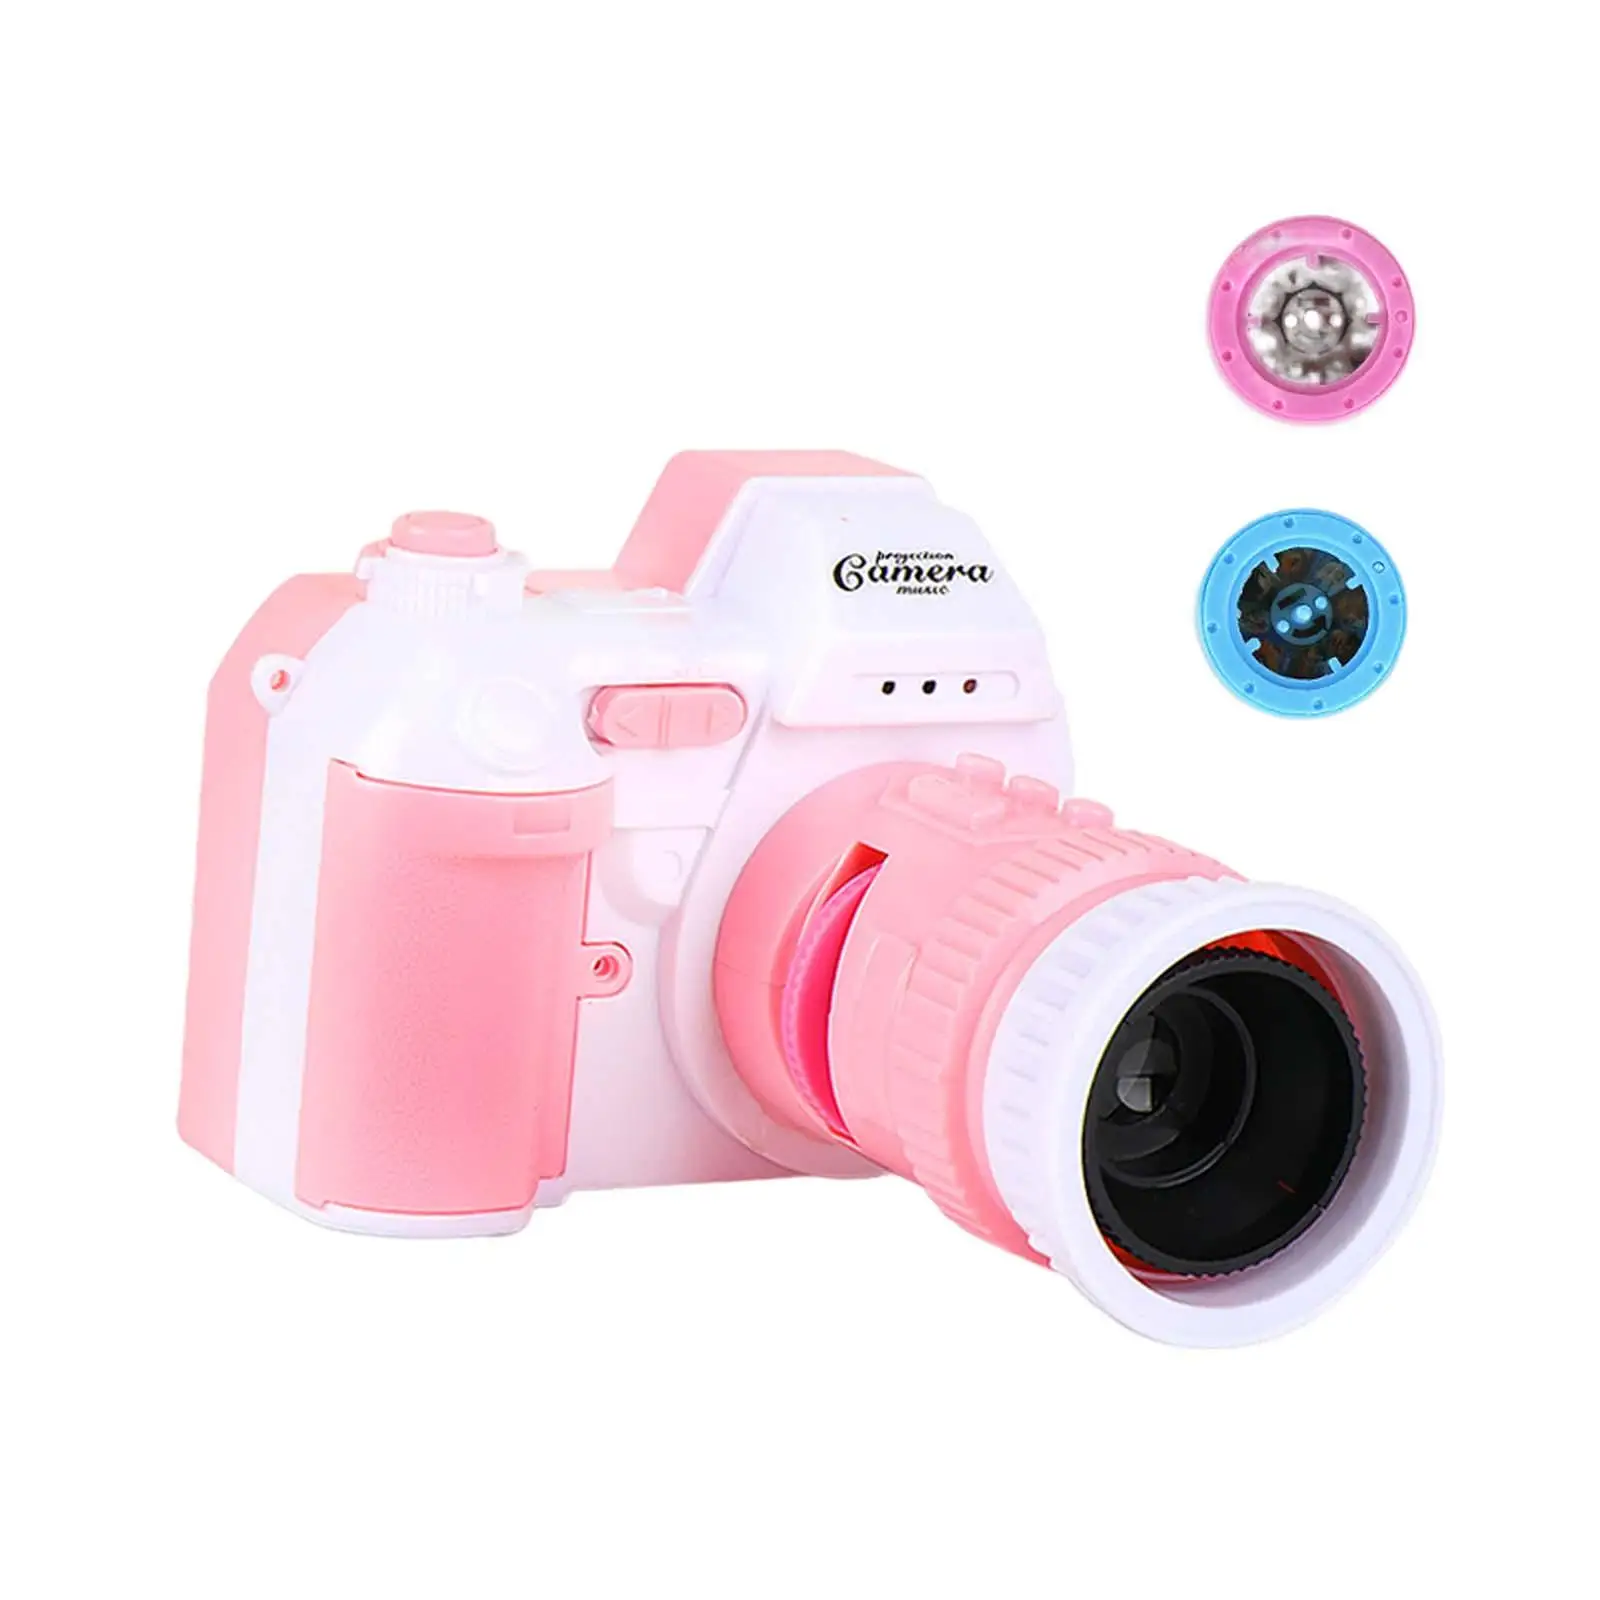 Projection Camera Toy with Light and Sounds for Children Day Birthday Gifts